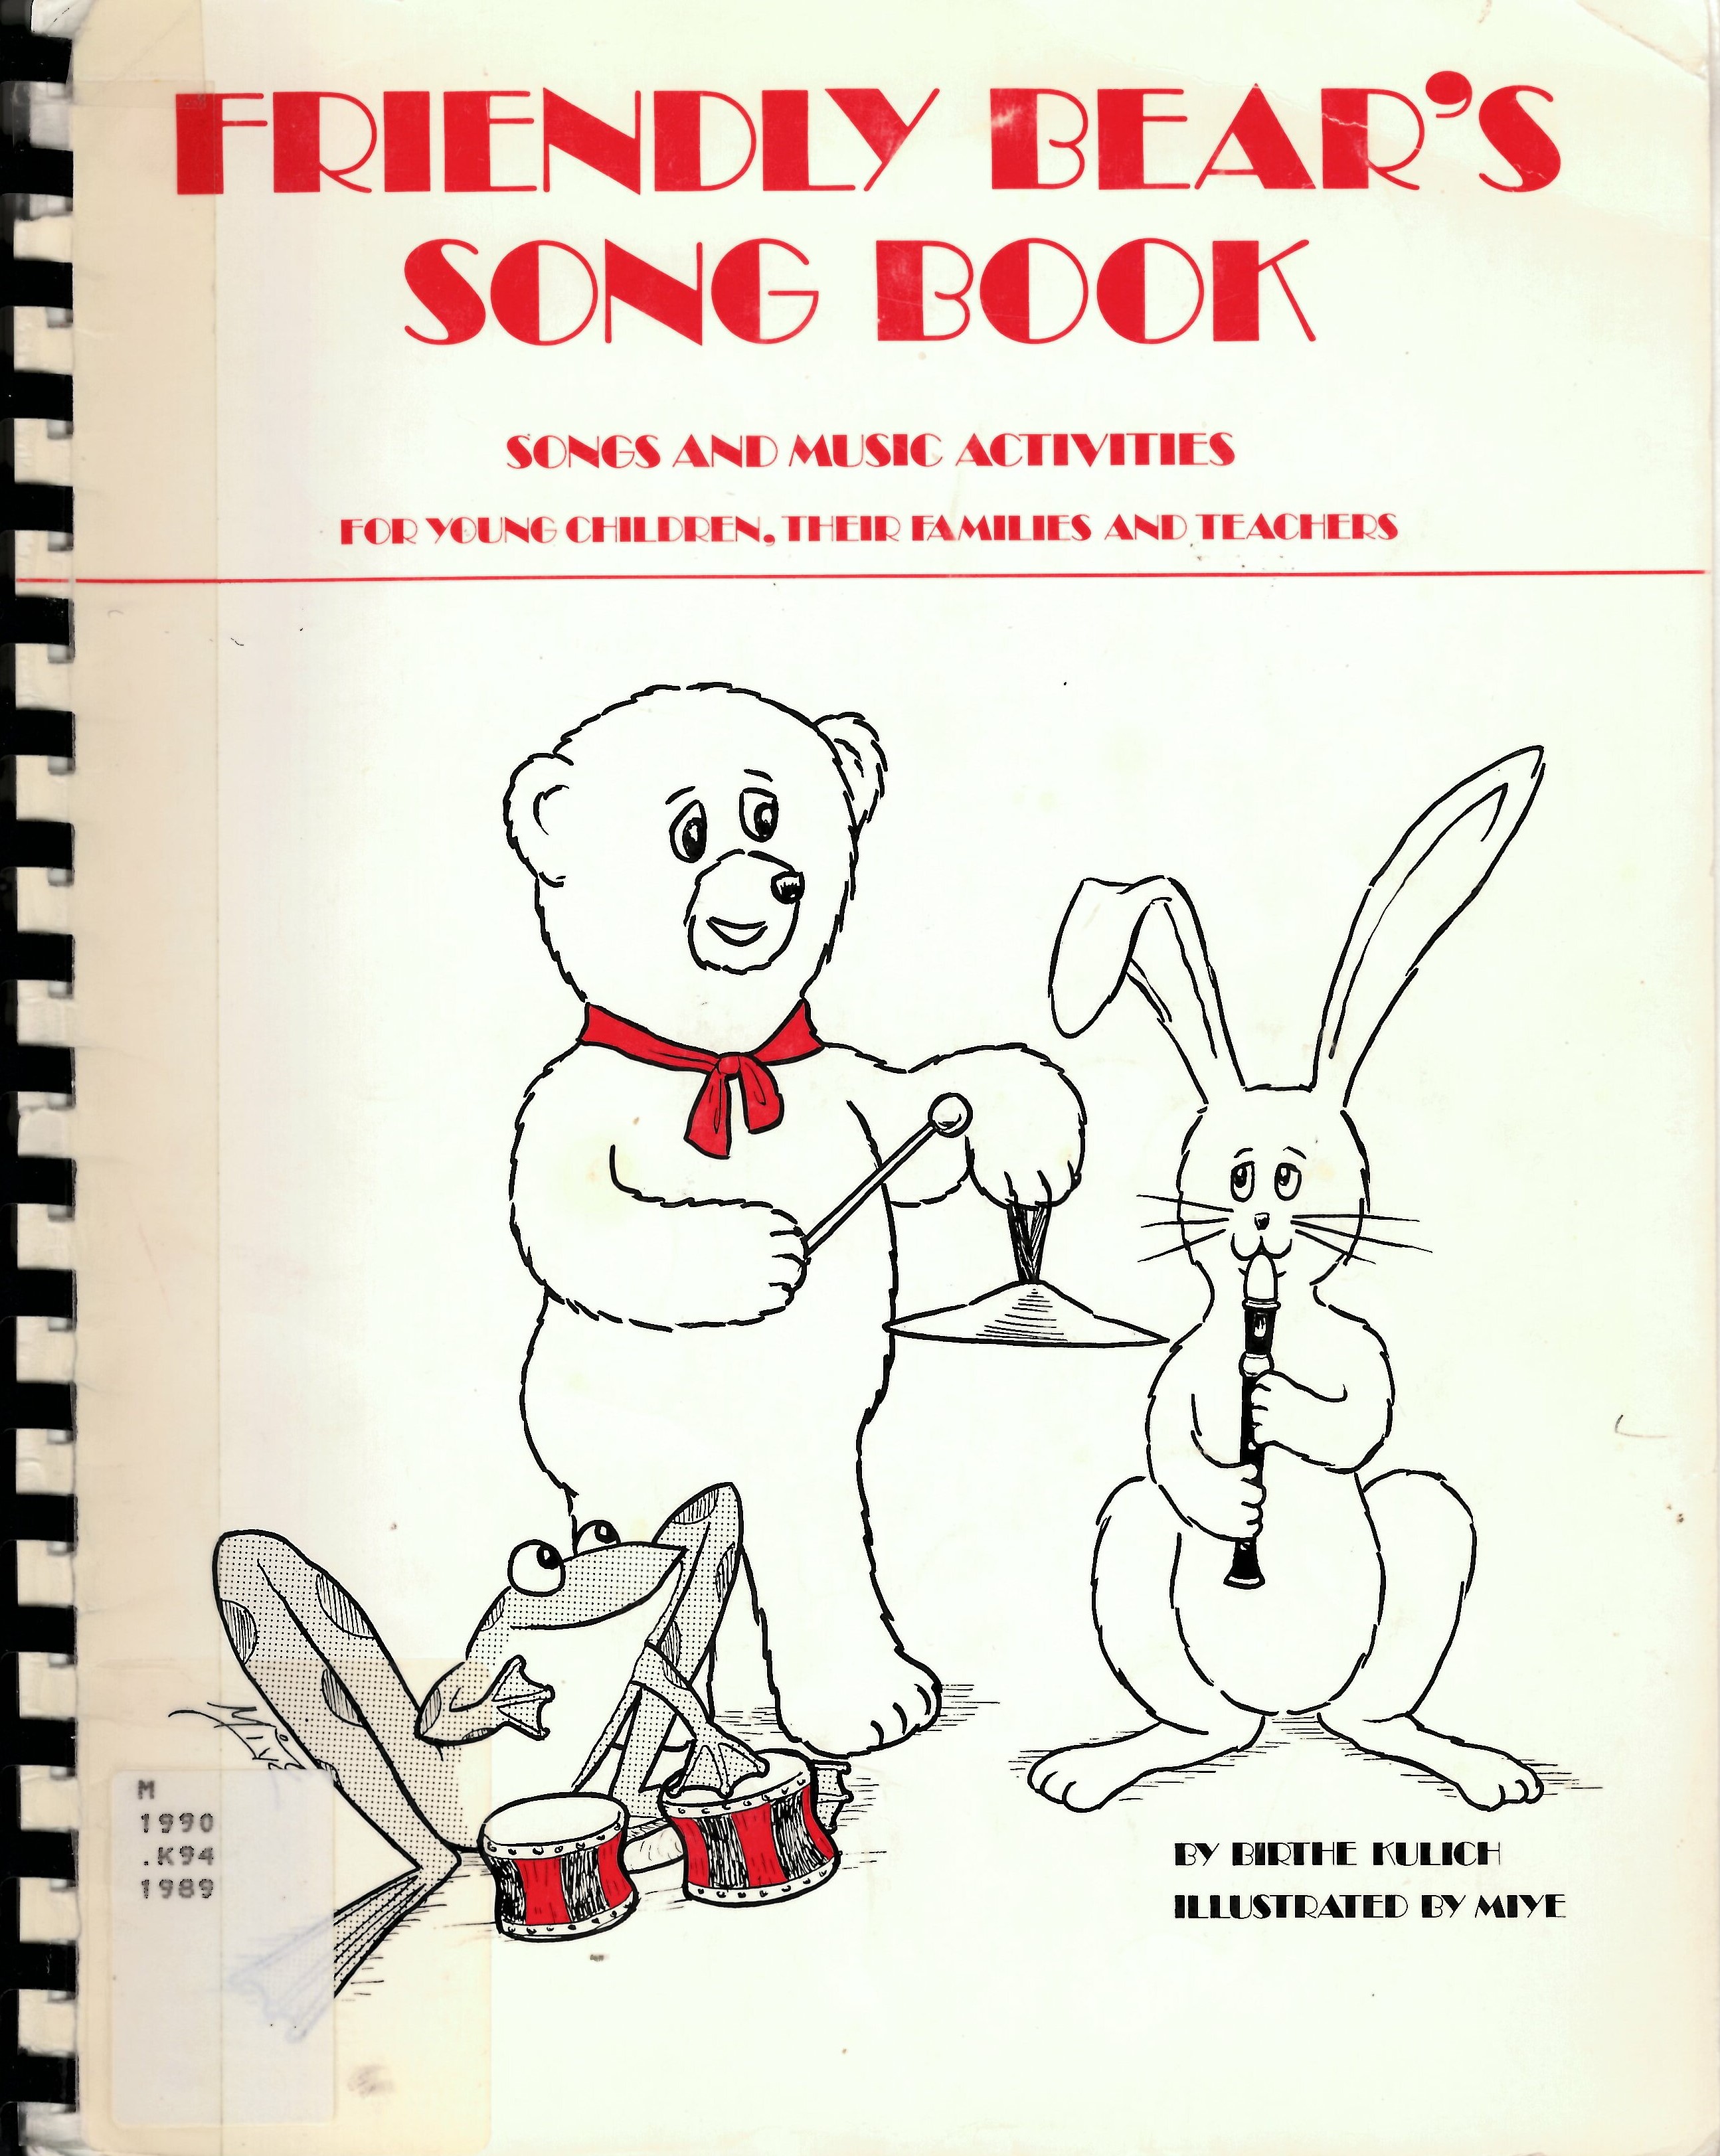 Friendly Bear's song book: songs and music activities  for young children, their families, and teachers /